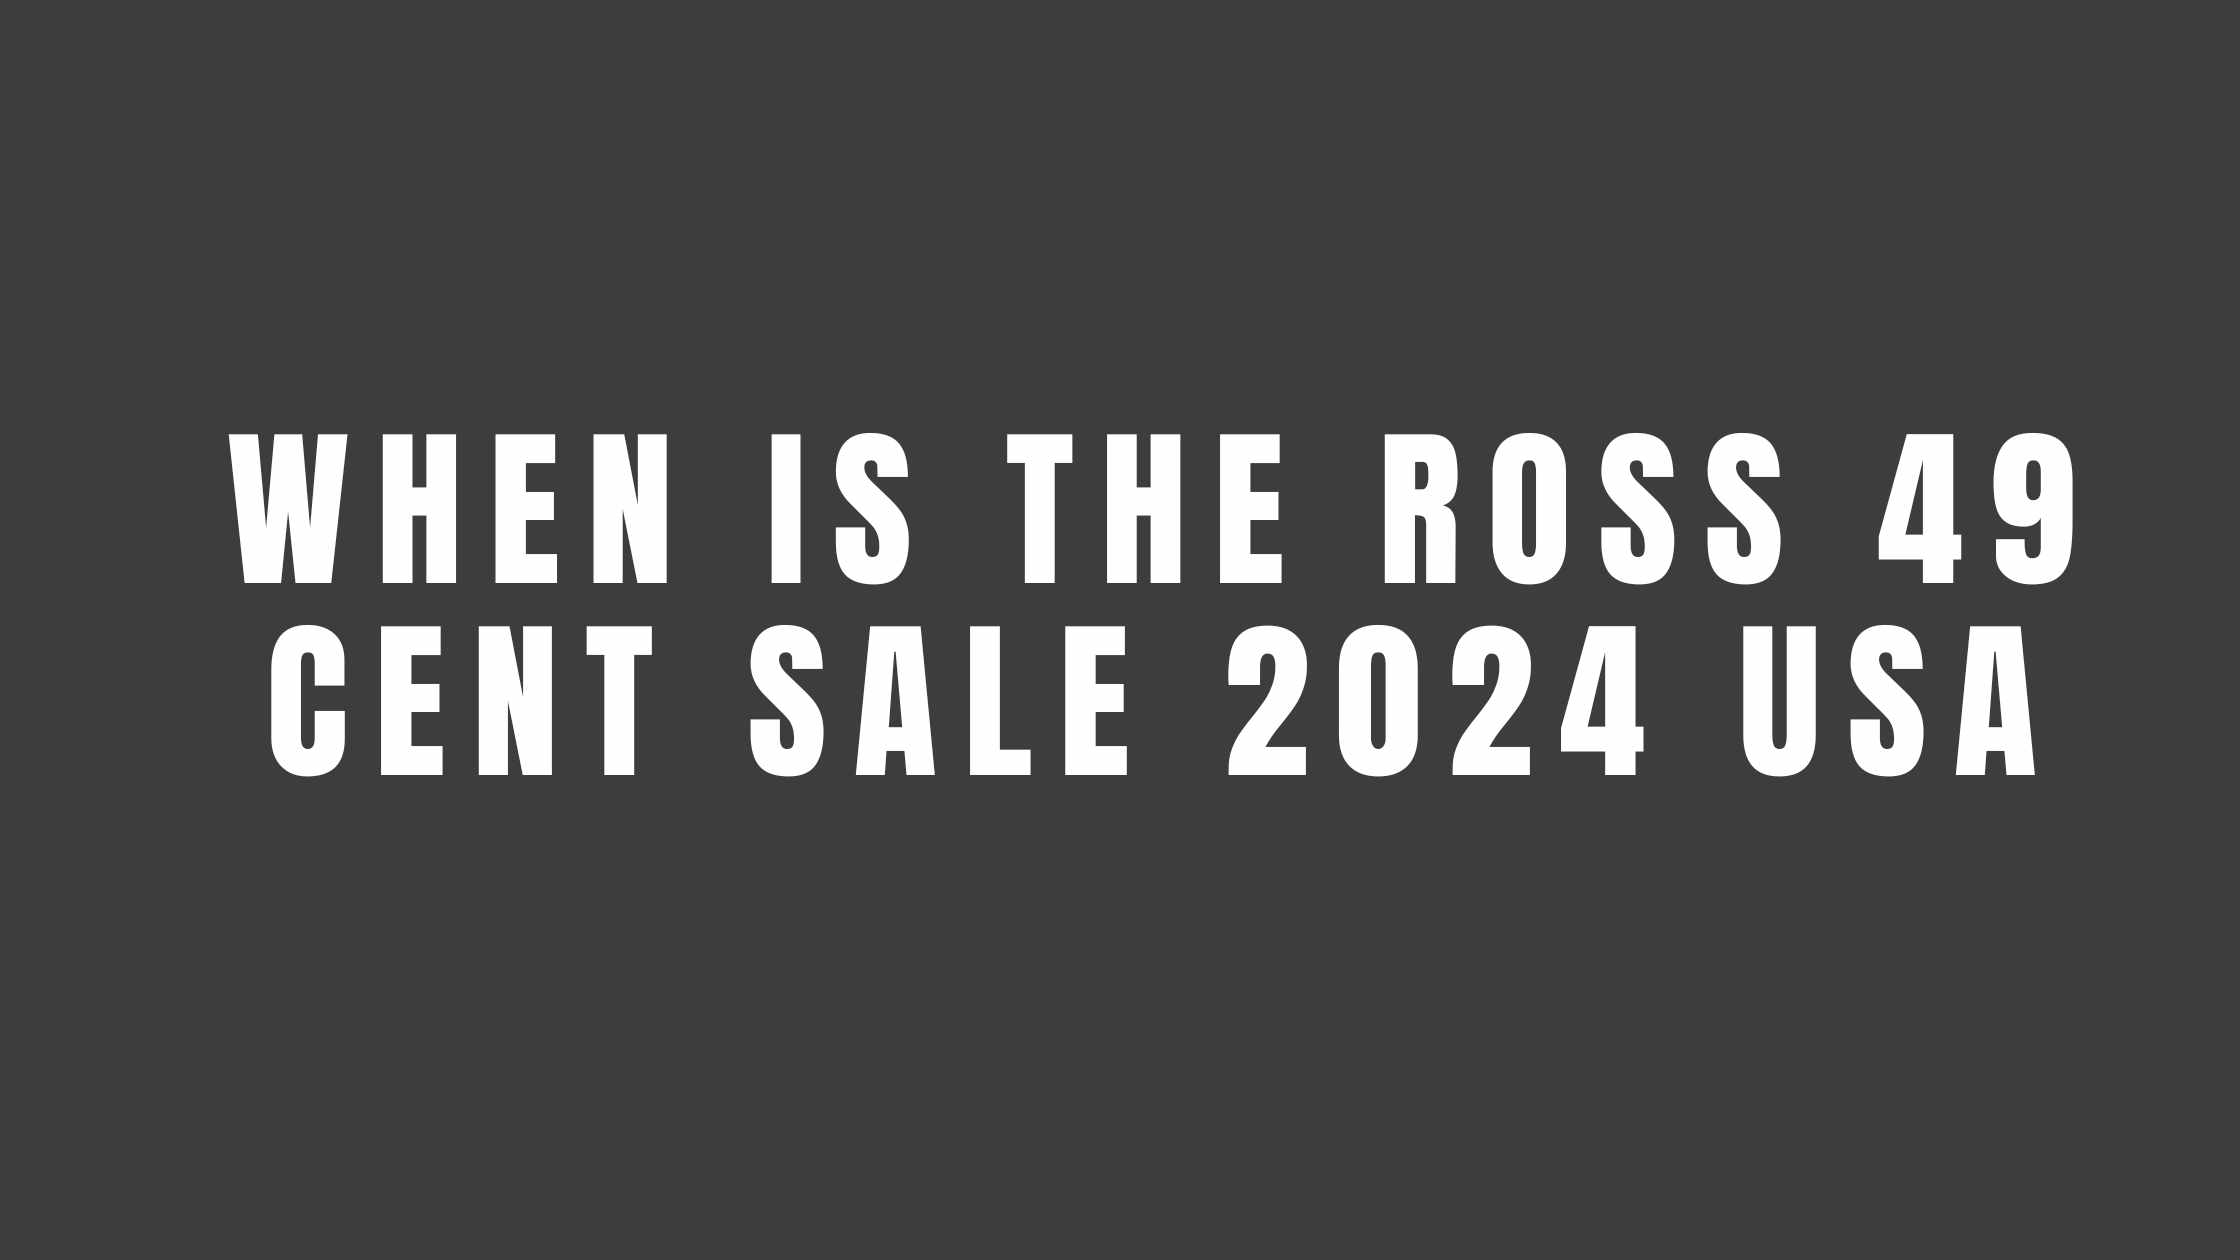 When Is the Ross 49 Cent Sale 2024 USA